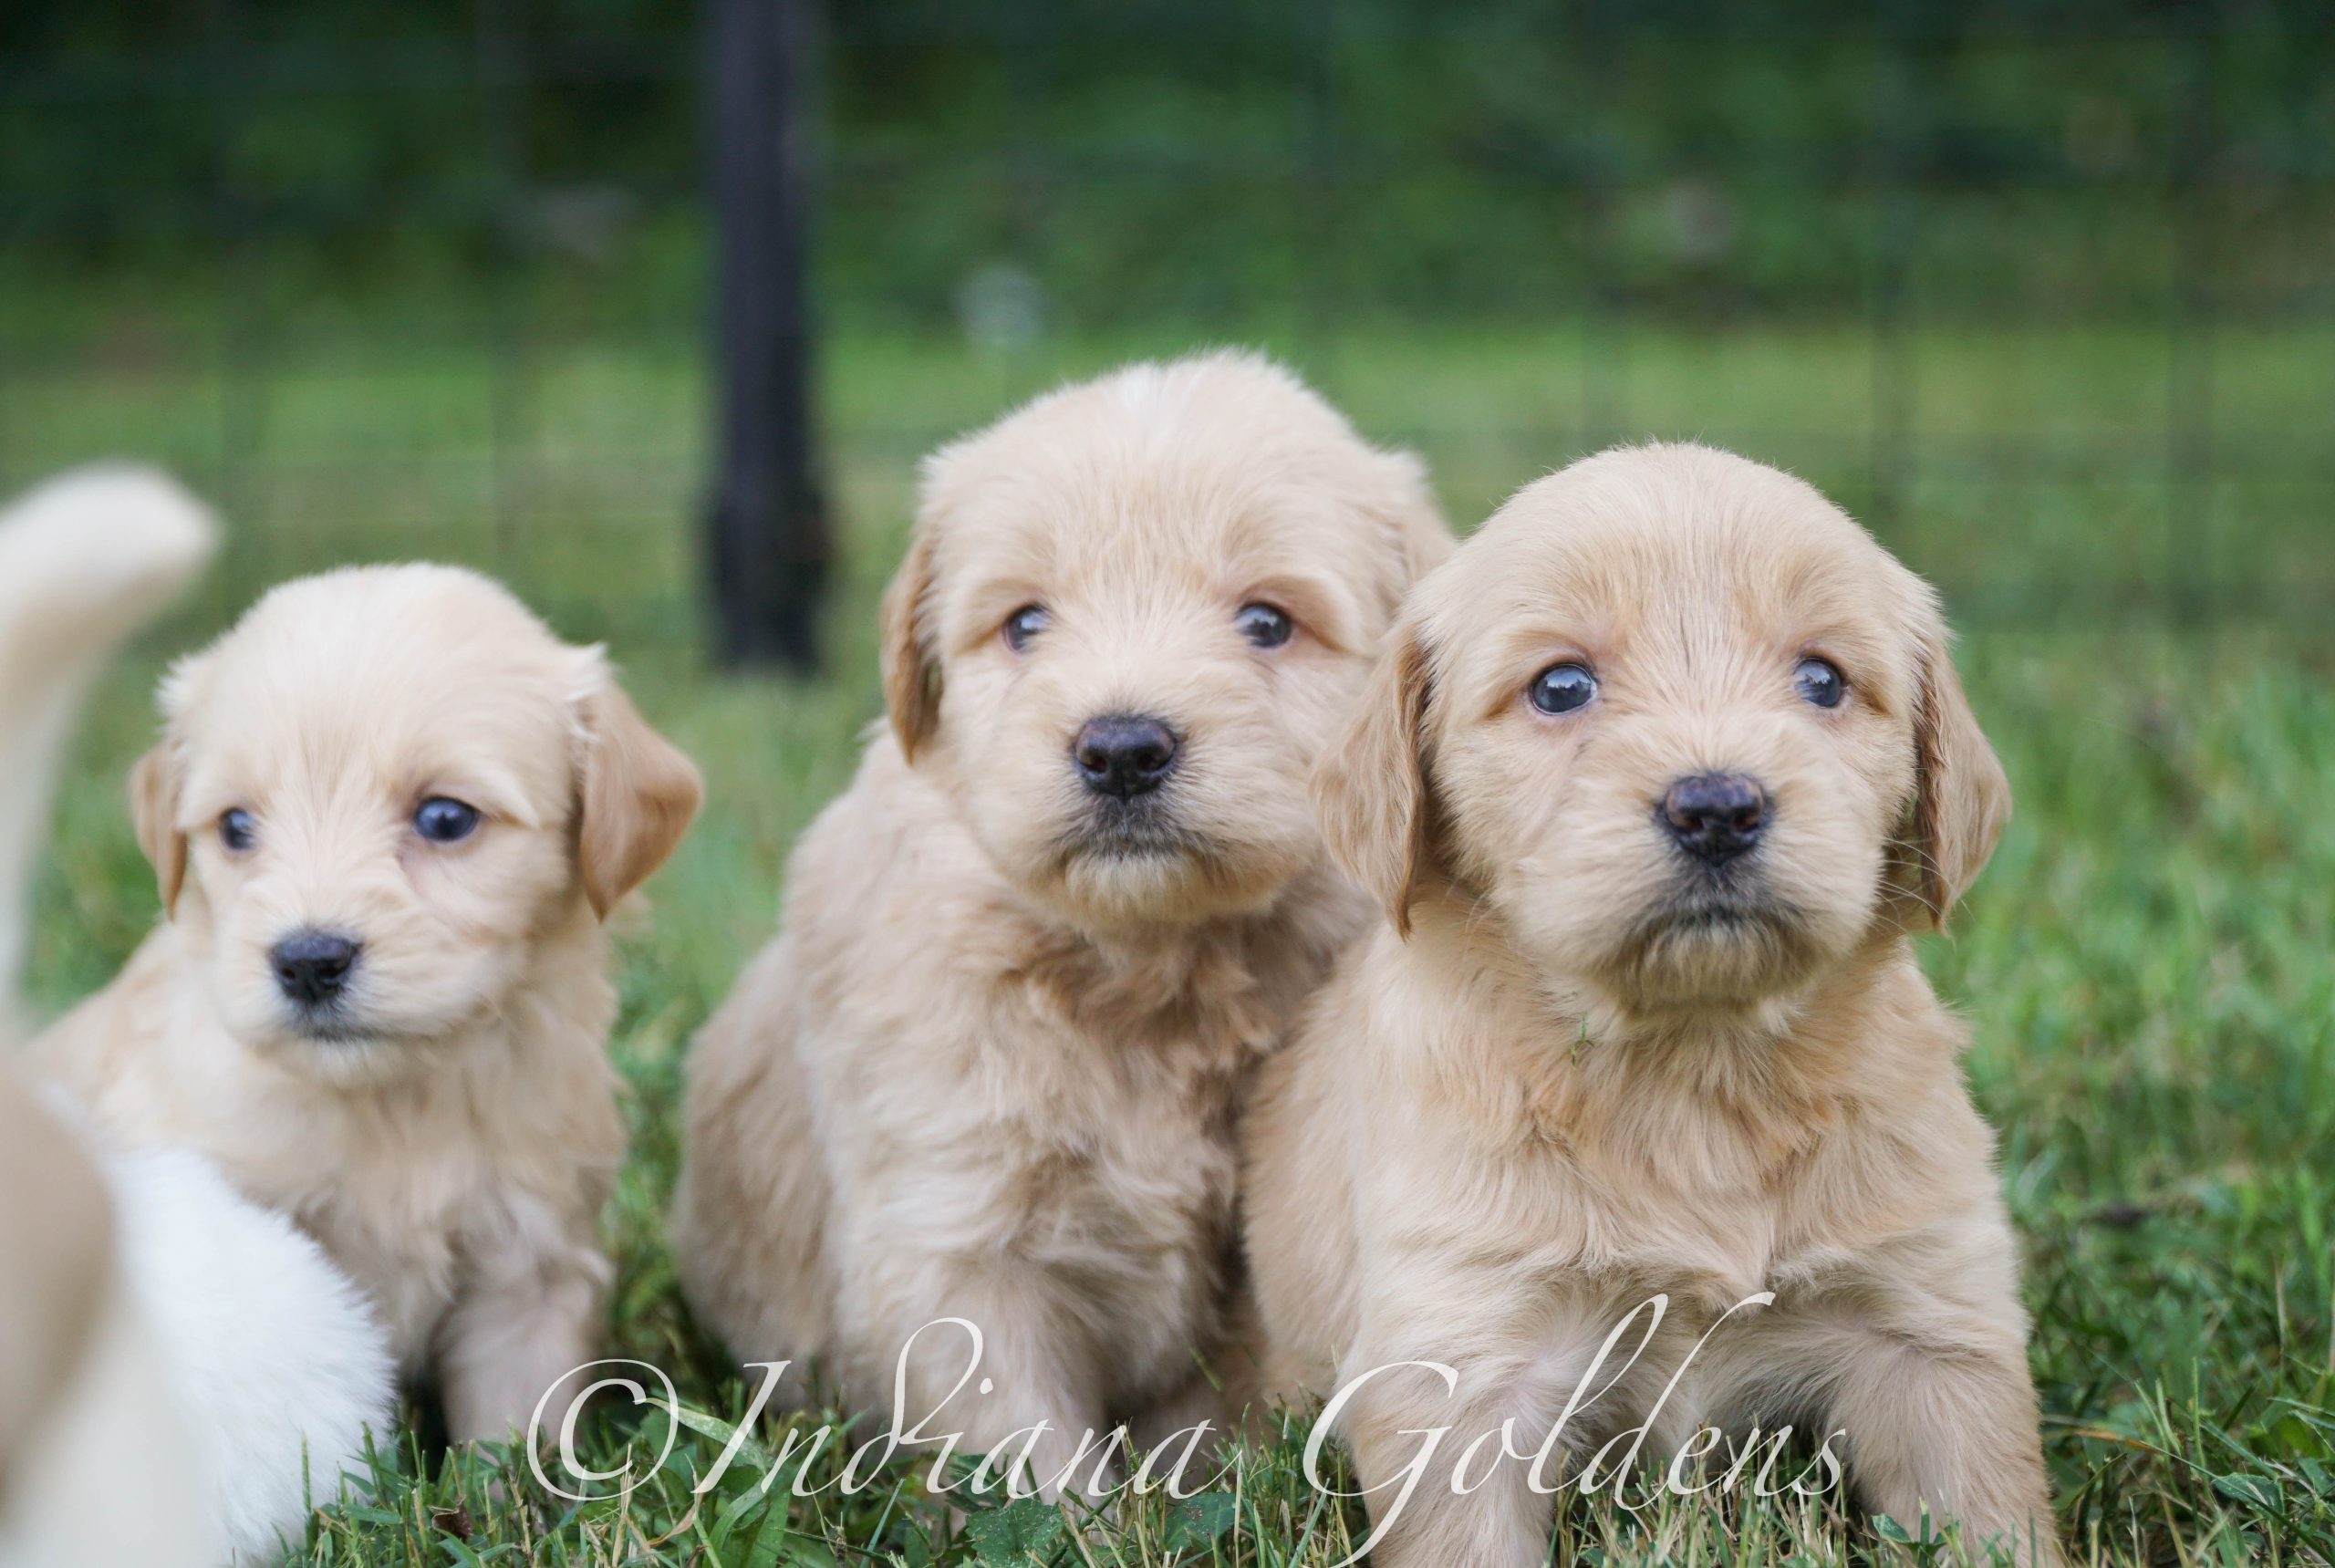 Goldendoodle Puppies for Sale Indiana